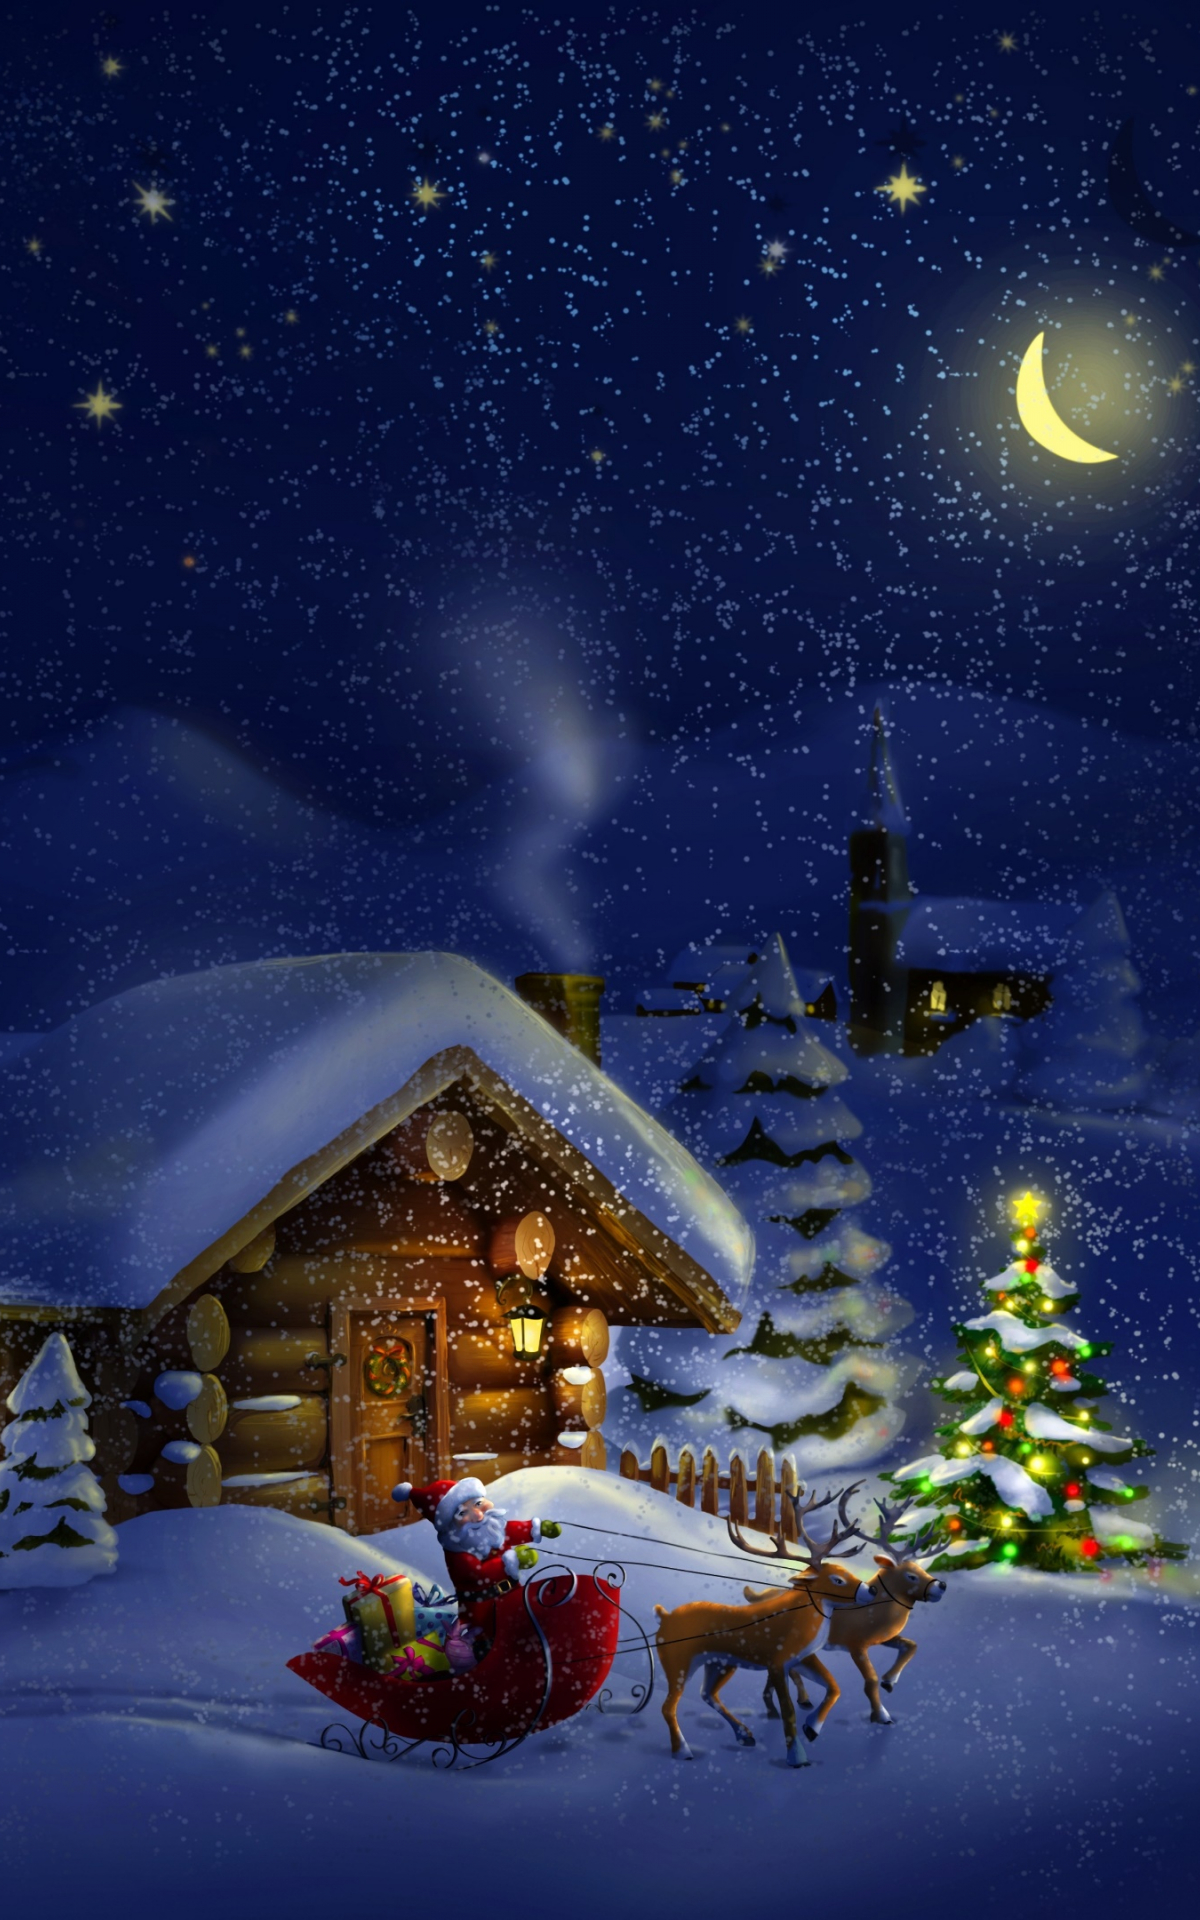 Free download Christmas night with Santa 4K Ultra HD wallpaper 4k [3840x2160] for your Desktop, Mobile & Tablet. Explore Christmas Night Wallpaper. Free 3D Christmas Wallpaper, Christmas Desktop Free